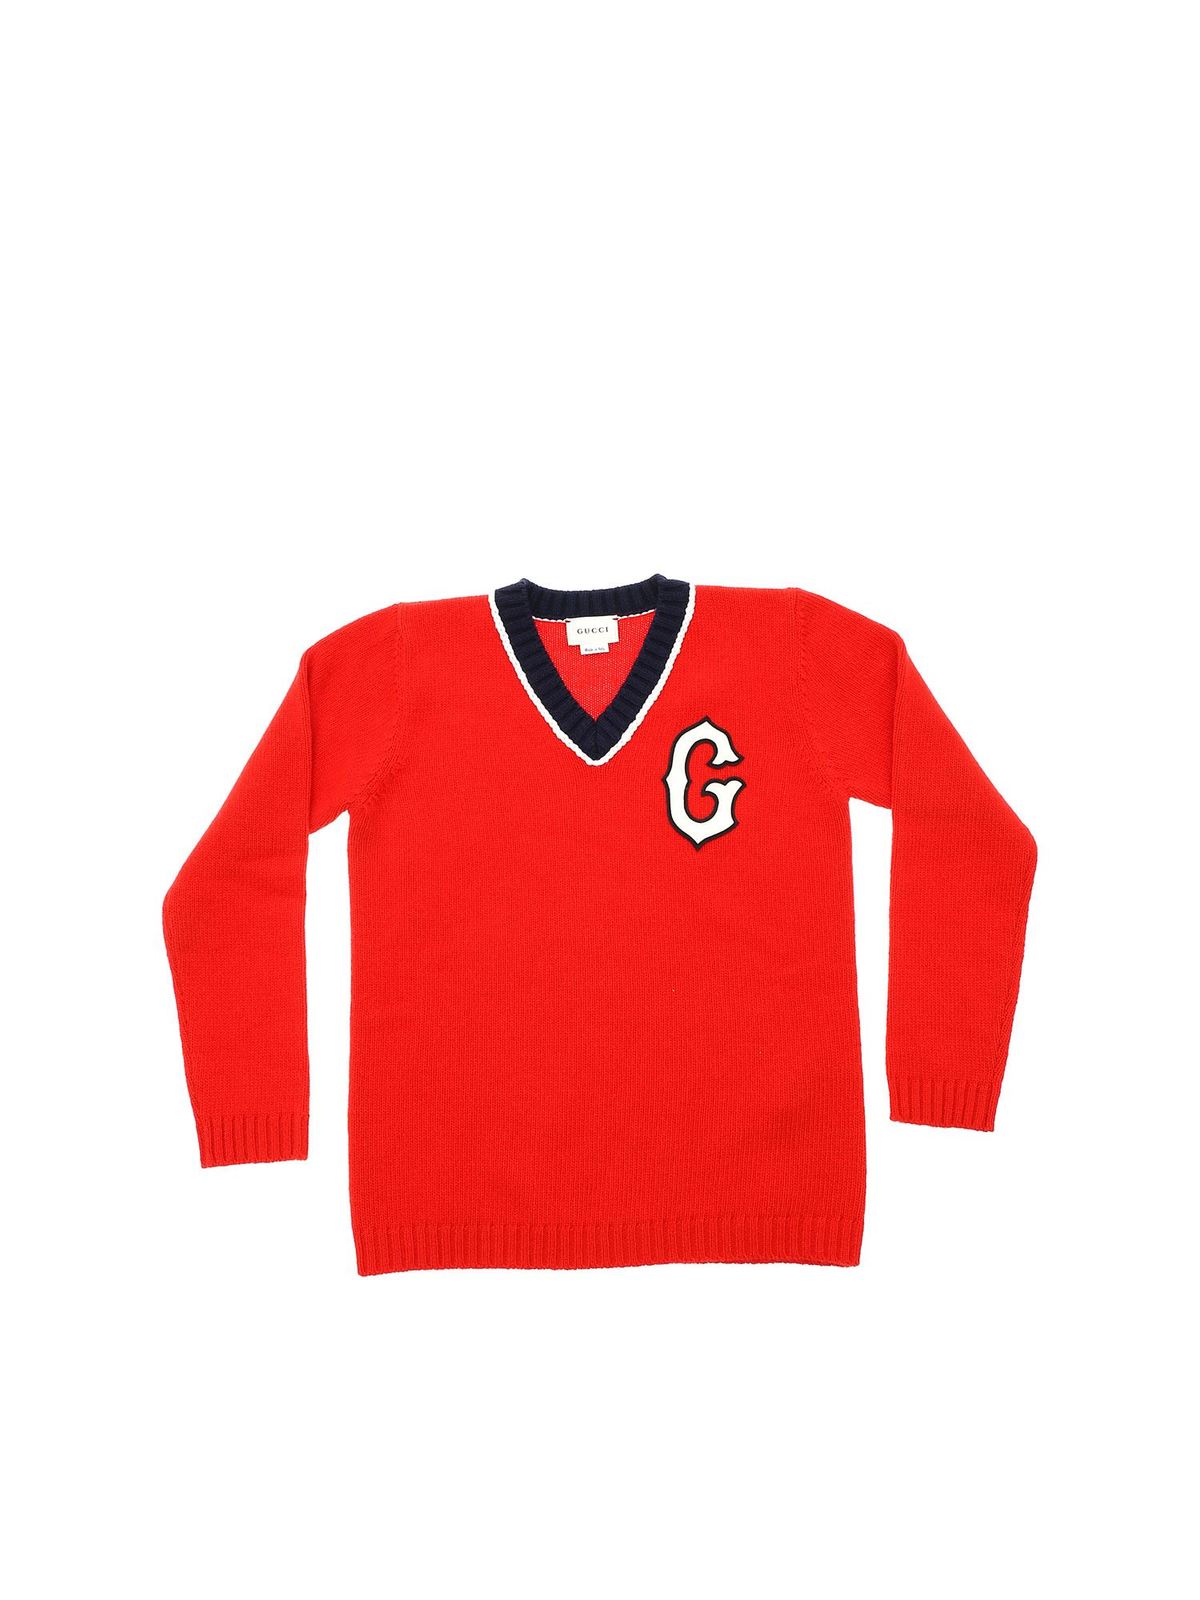 Gucci Red V Neck Pullover With White G لباس بافتنی xkap